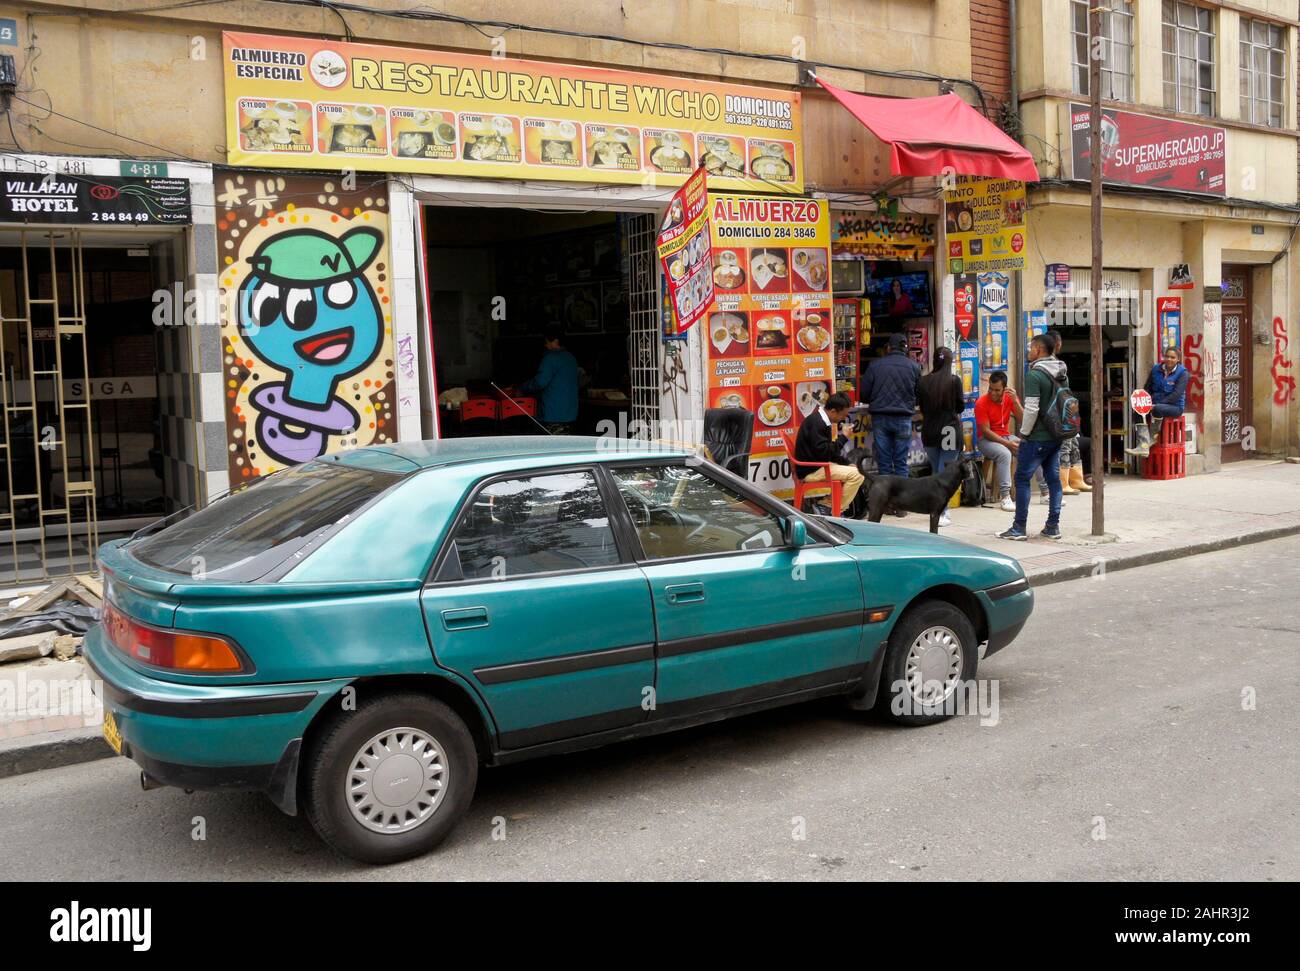 Small businesses, people socializing, and a car parked on Calle 18 in La Candelaria district of Bogota, Colombia Stock Photo